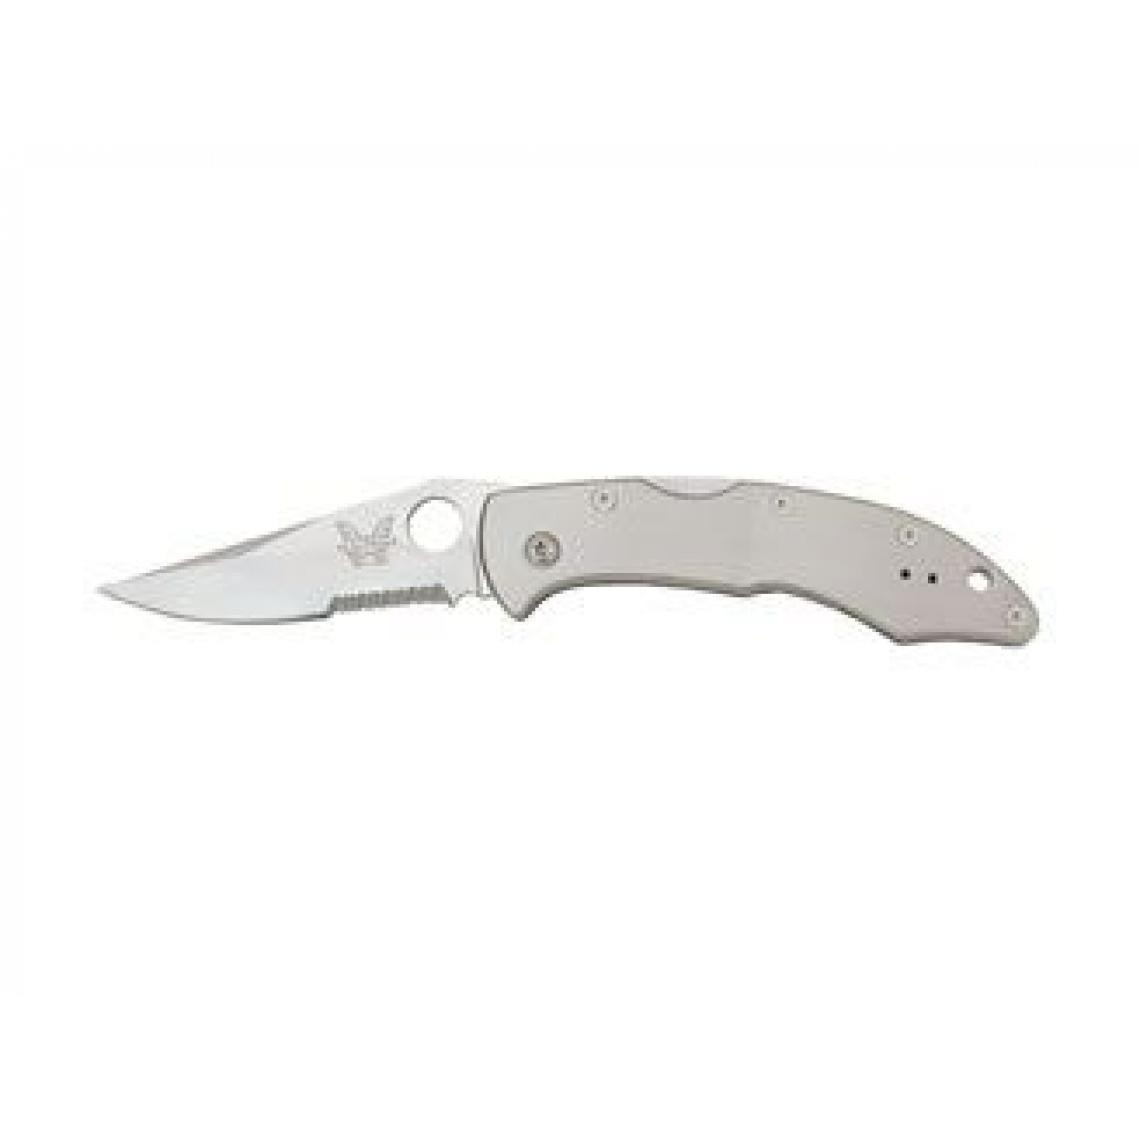 Divers Marques - Benchmade MINI TIPIKA II 10412S-1 COMBO - Outils de coupe